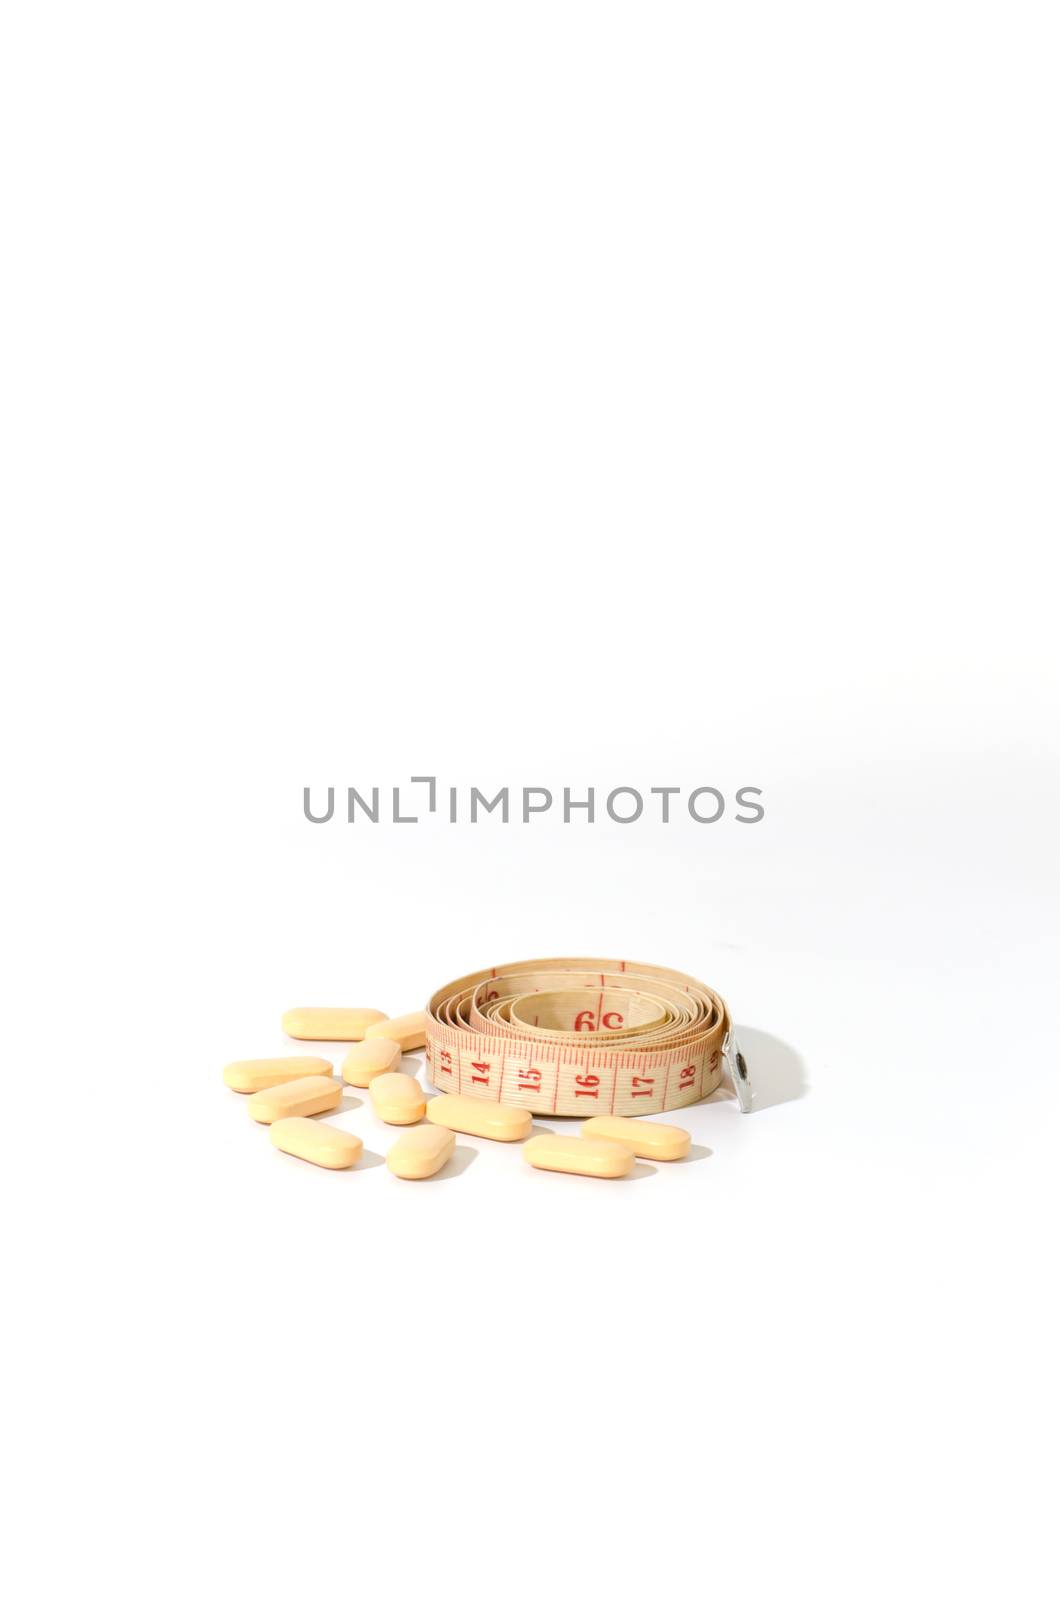 pills and measuring tape on a white background